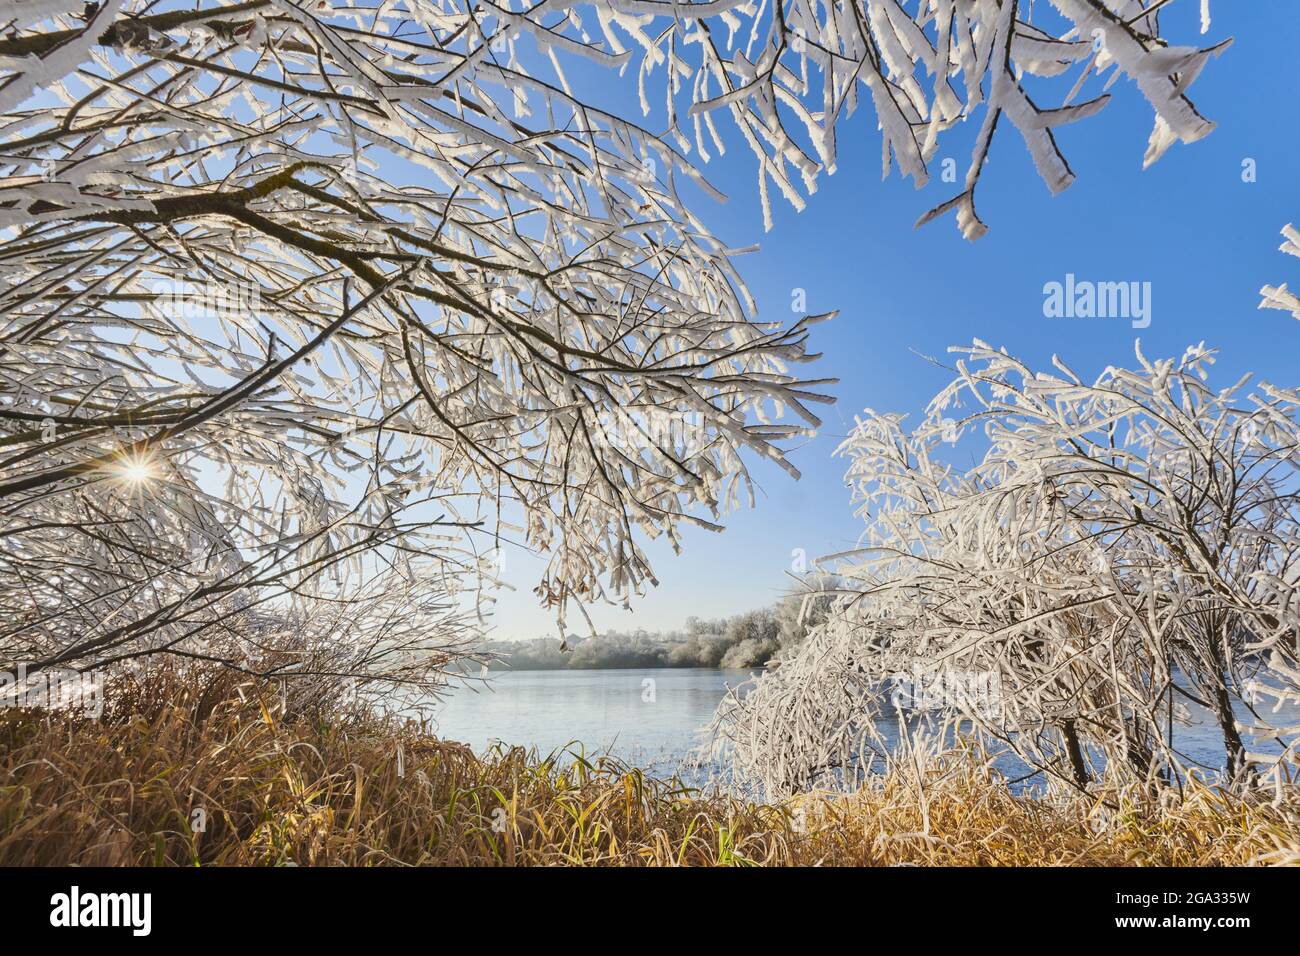 Frozen trees and bushes at a lake near Rettenbach in the Bavarian Forest; Bavaria, Germany Stock Photo